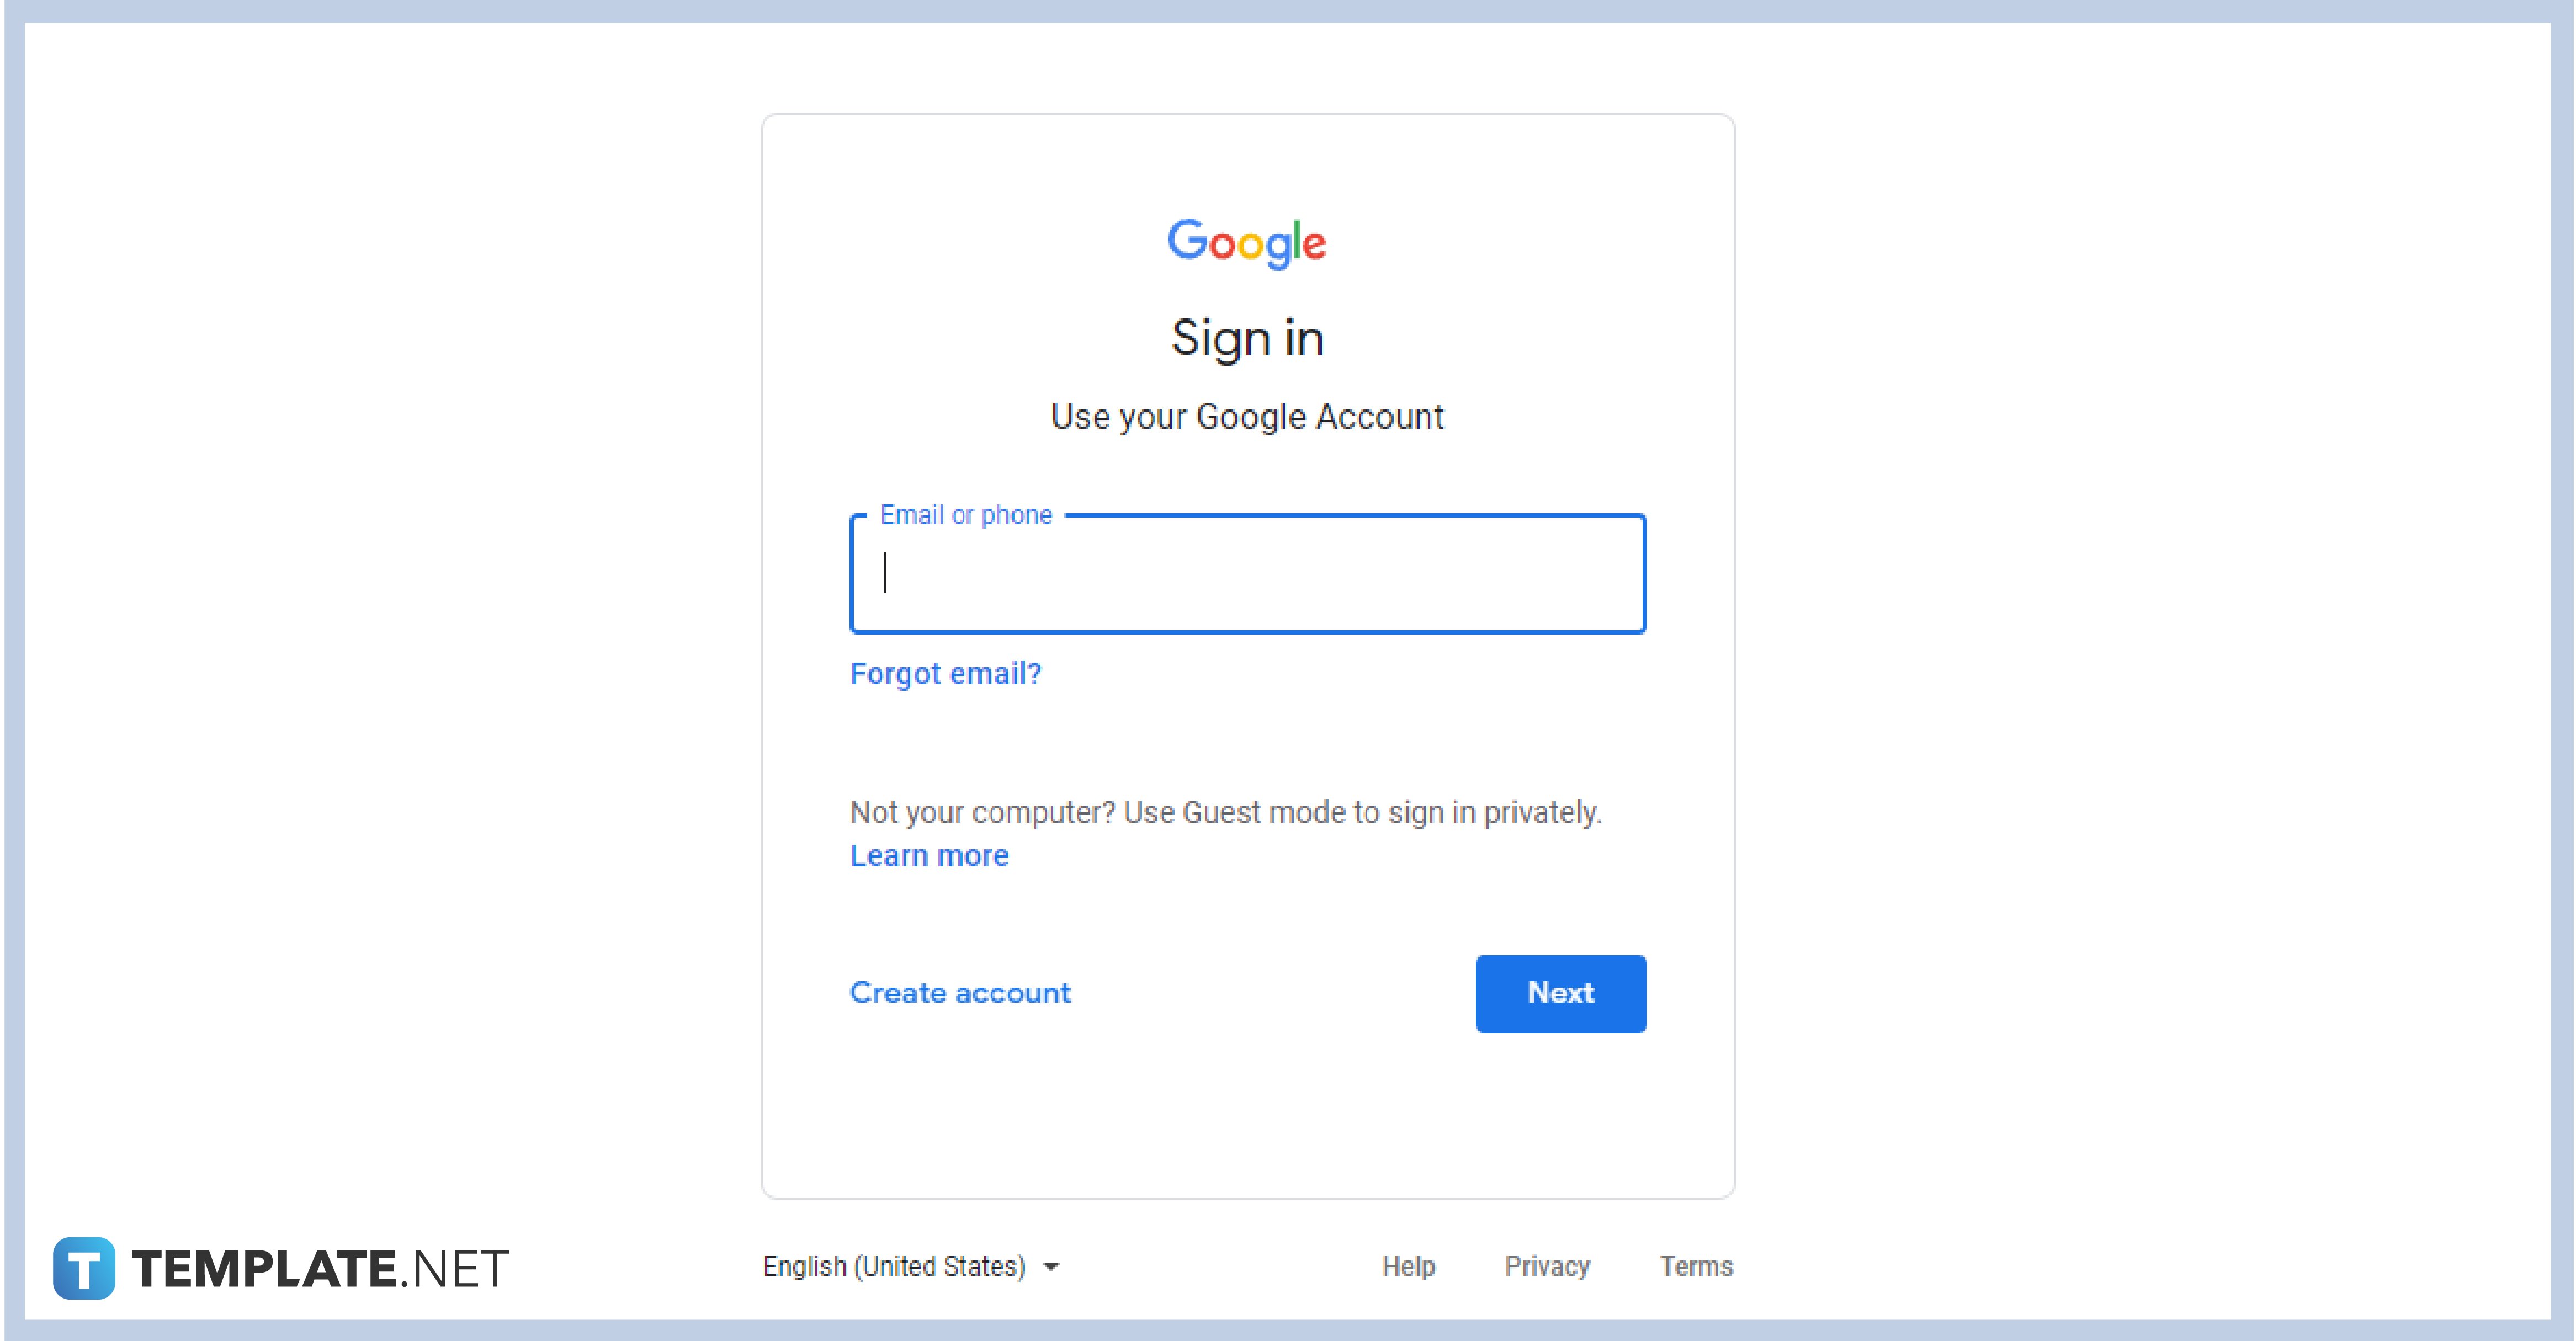 step-1-sign-in-with-your-account-0115